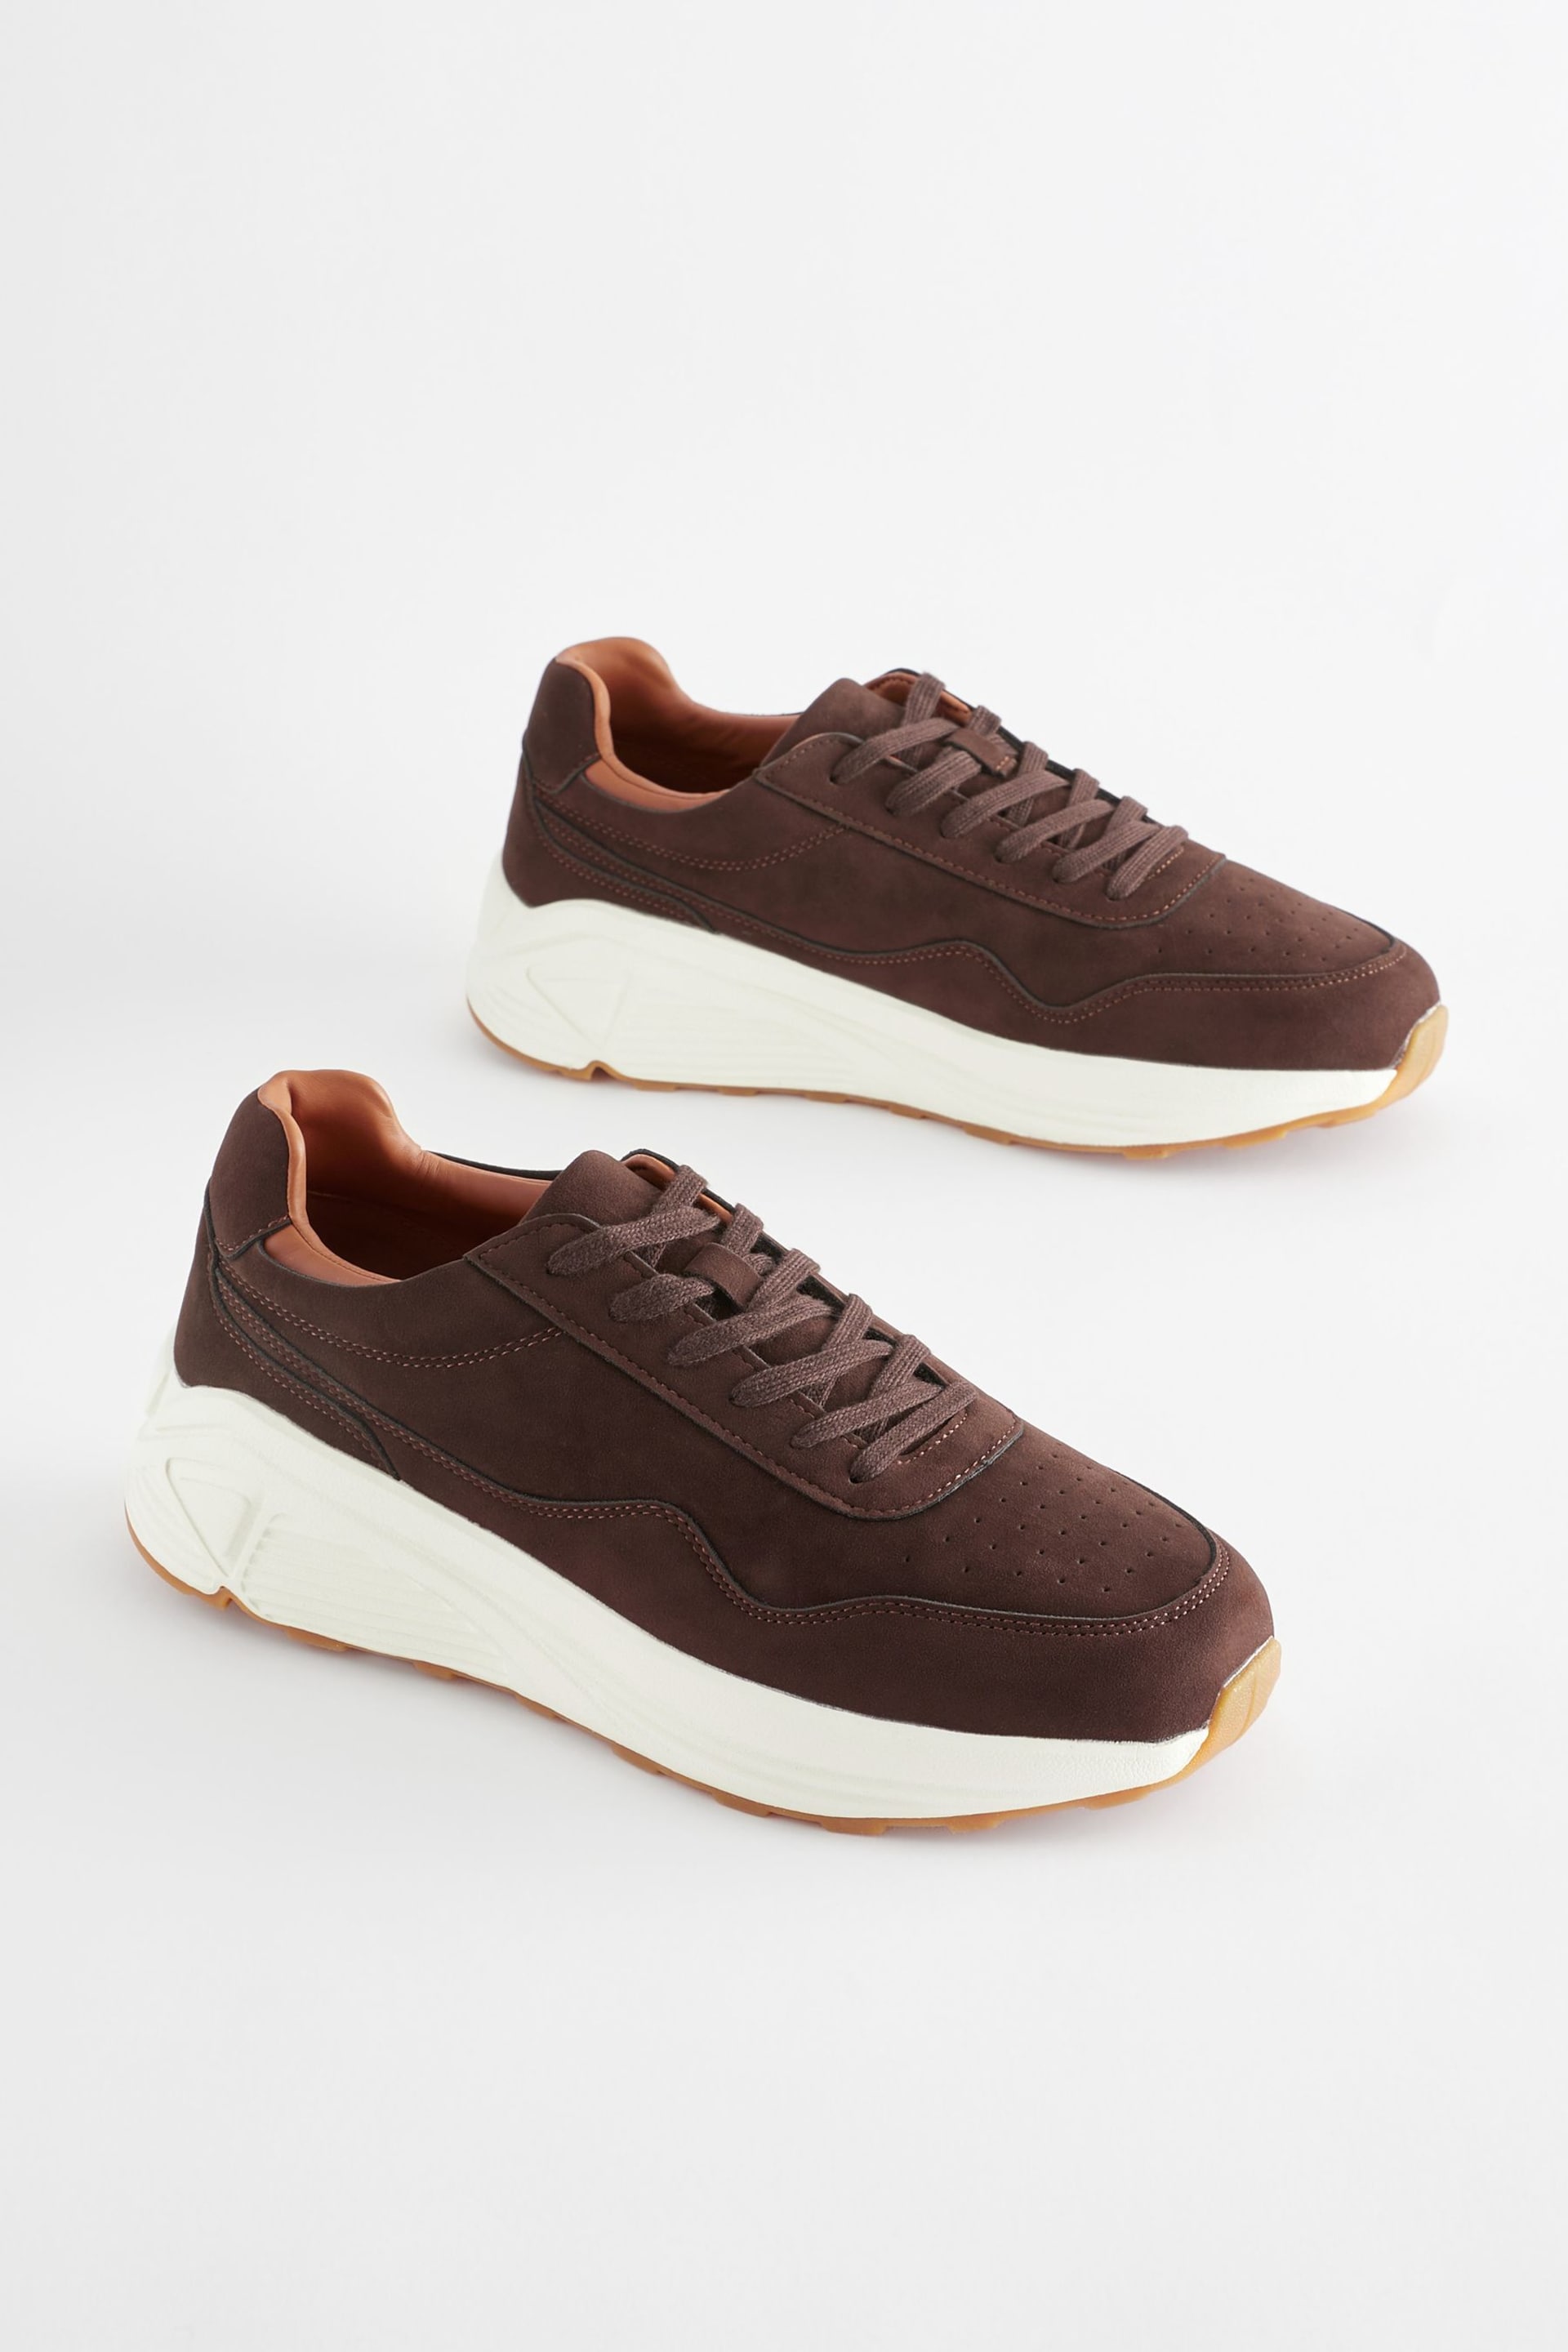 Brown Trainers - Image 1 of 7